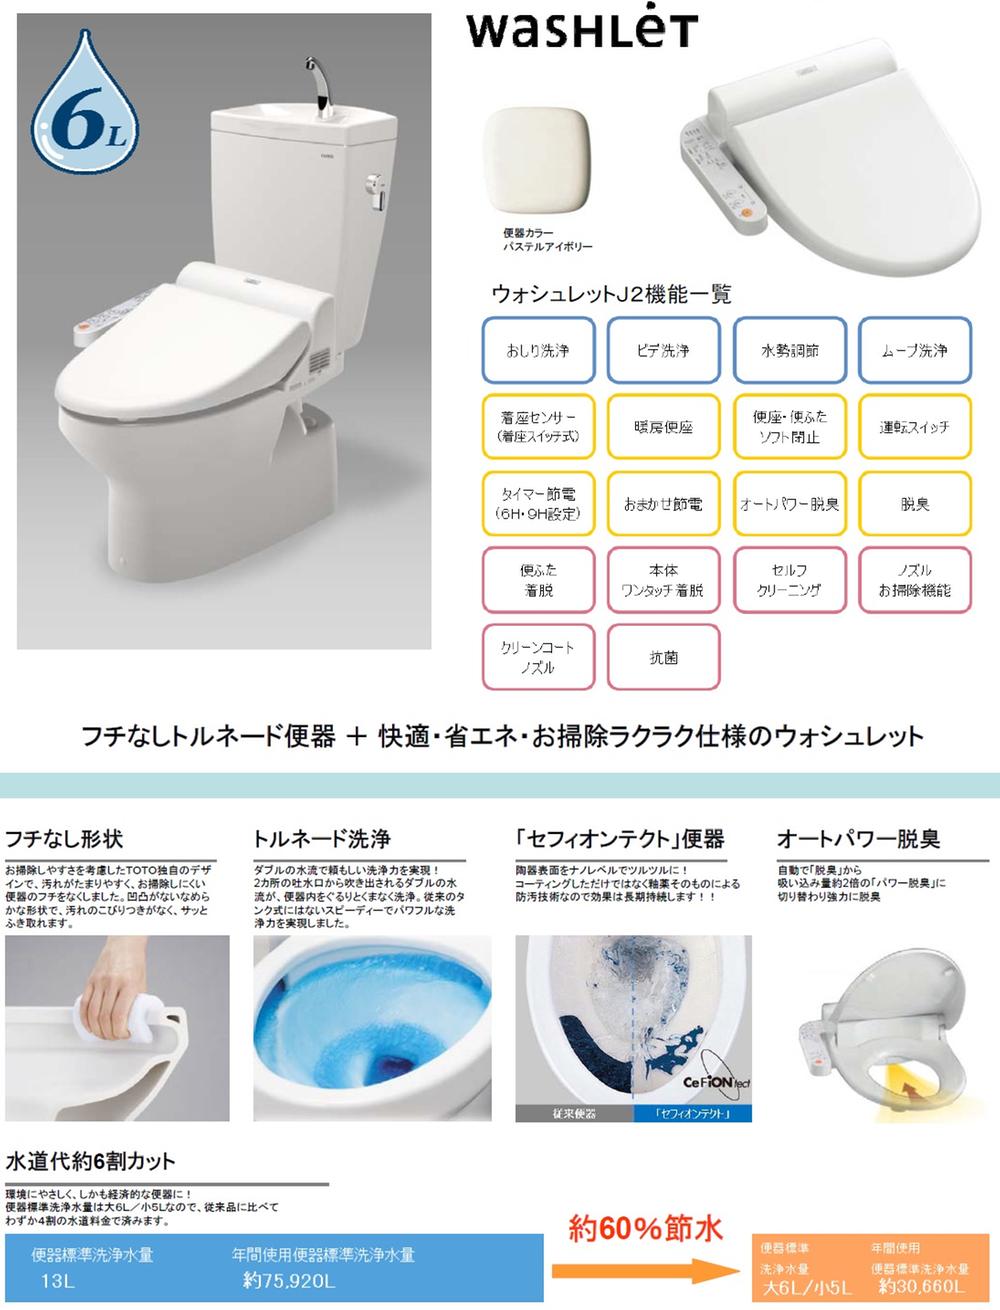 Other Equipment.  ・ Borderless shape that takes into account the ease of cleaning.  ・ Tornado cleaning to wash all over the inside of the toilet bowl in the double of water flow.  ・ The pottery surface was coated in slippery at the nano-level "Sefi on Detect" toilet bowl.  ・ Automatically from "deodorizing", Deodorizing in cooperation switches to suction weight of about 2 times the "power deodorizing".